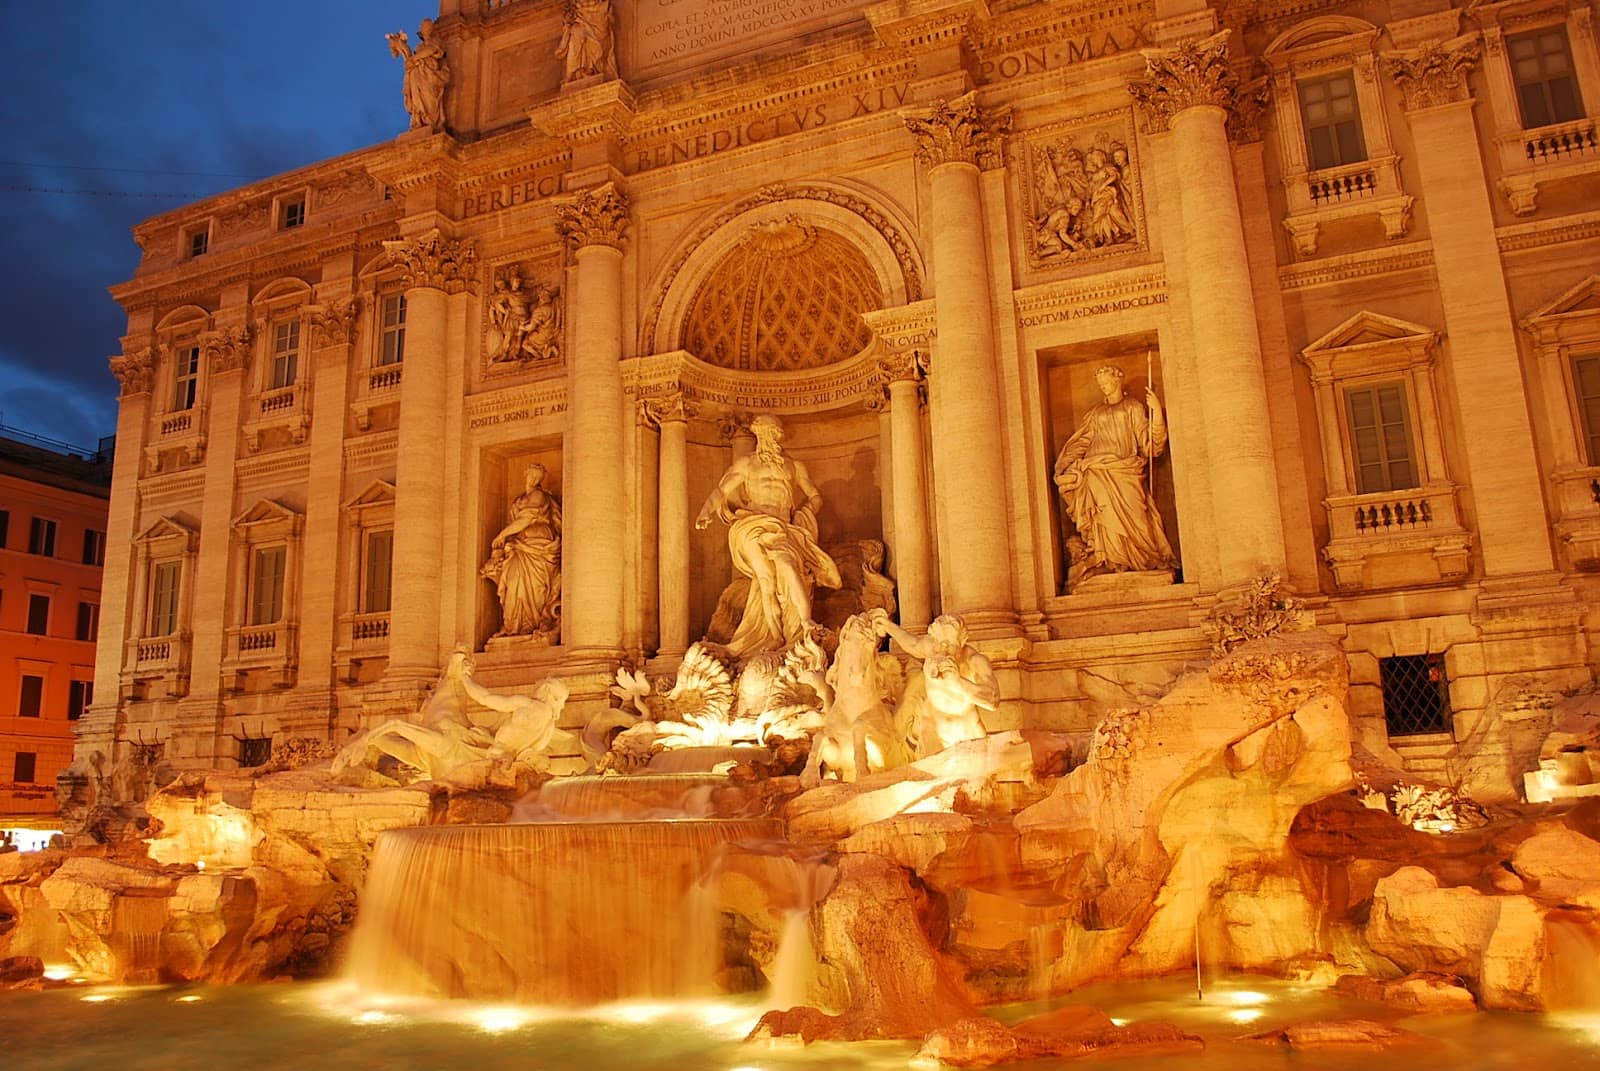 images/tours/cities/rome trevi-fountain.jpg